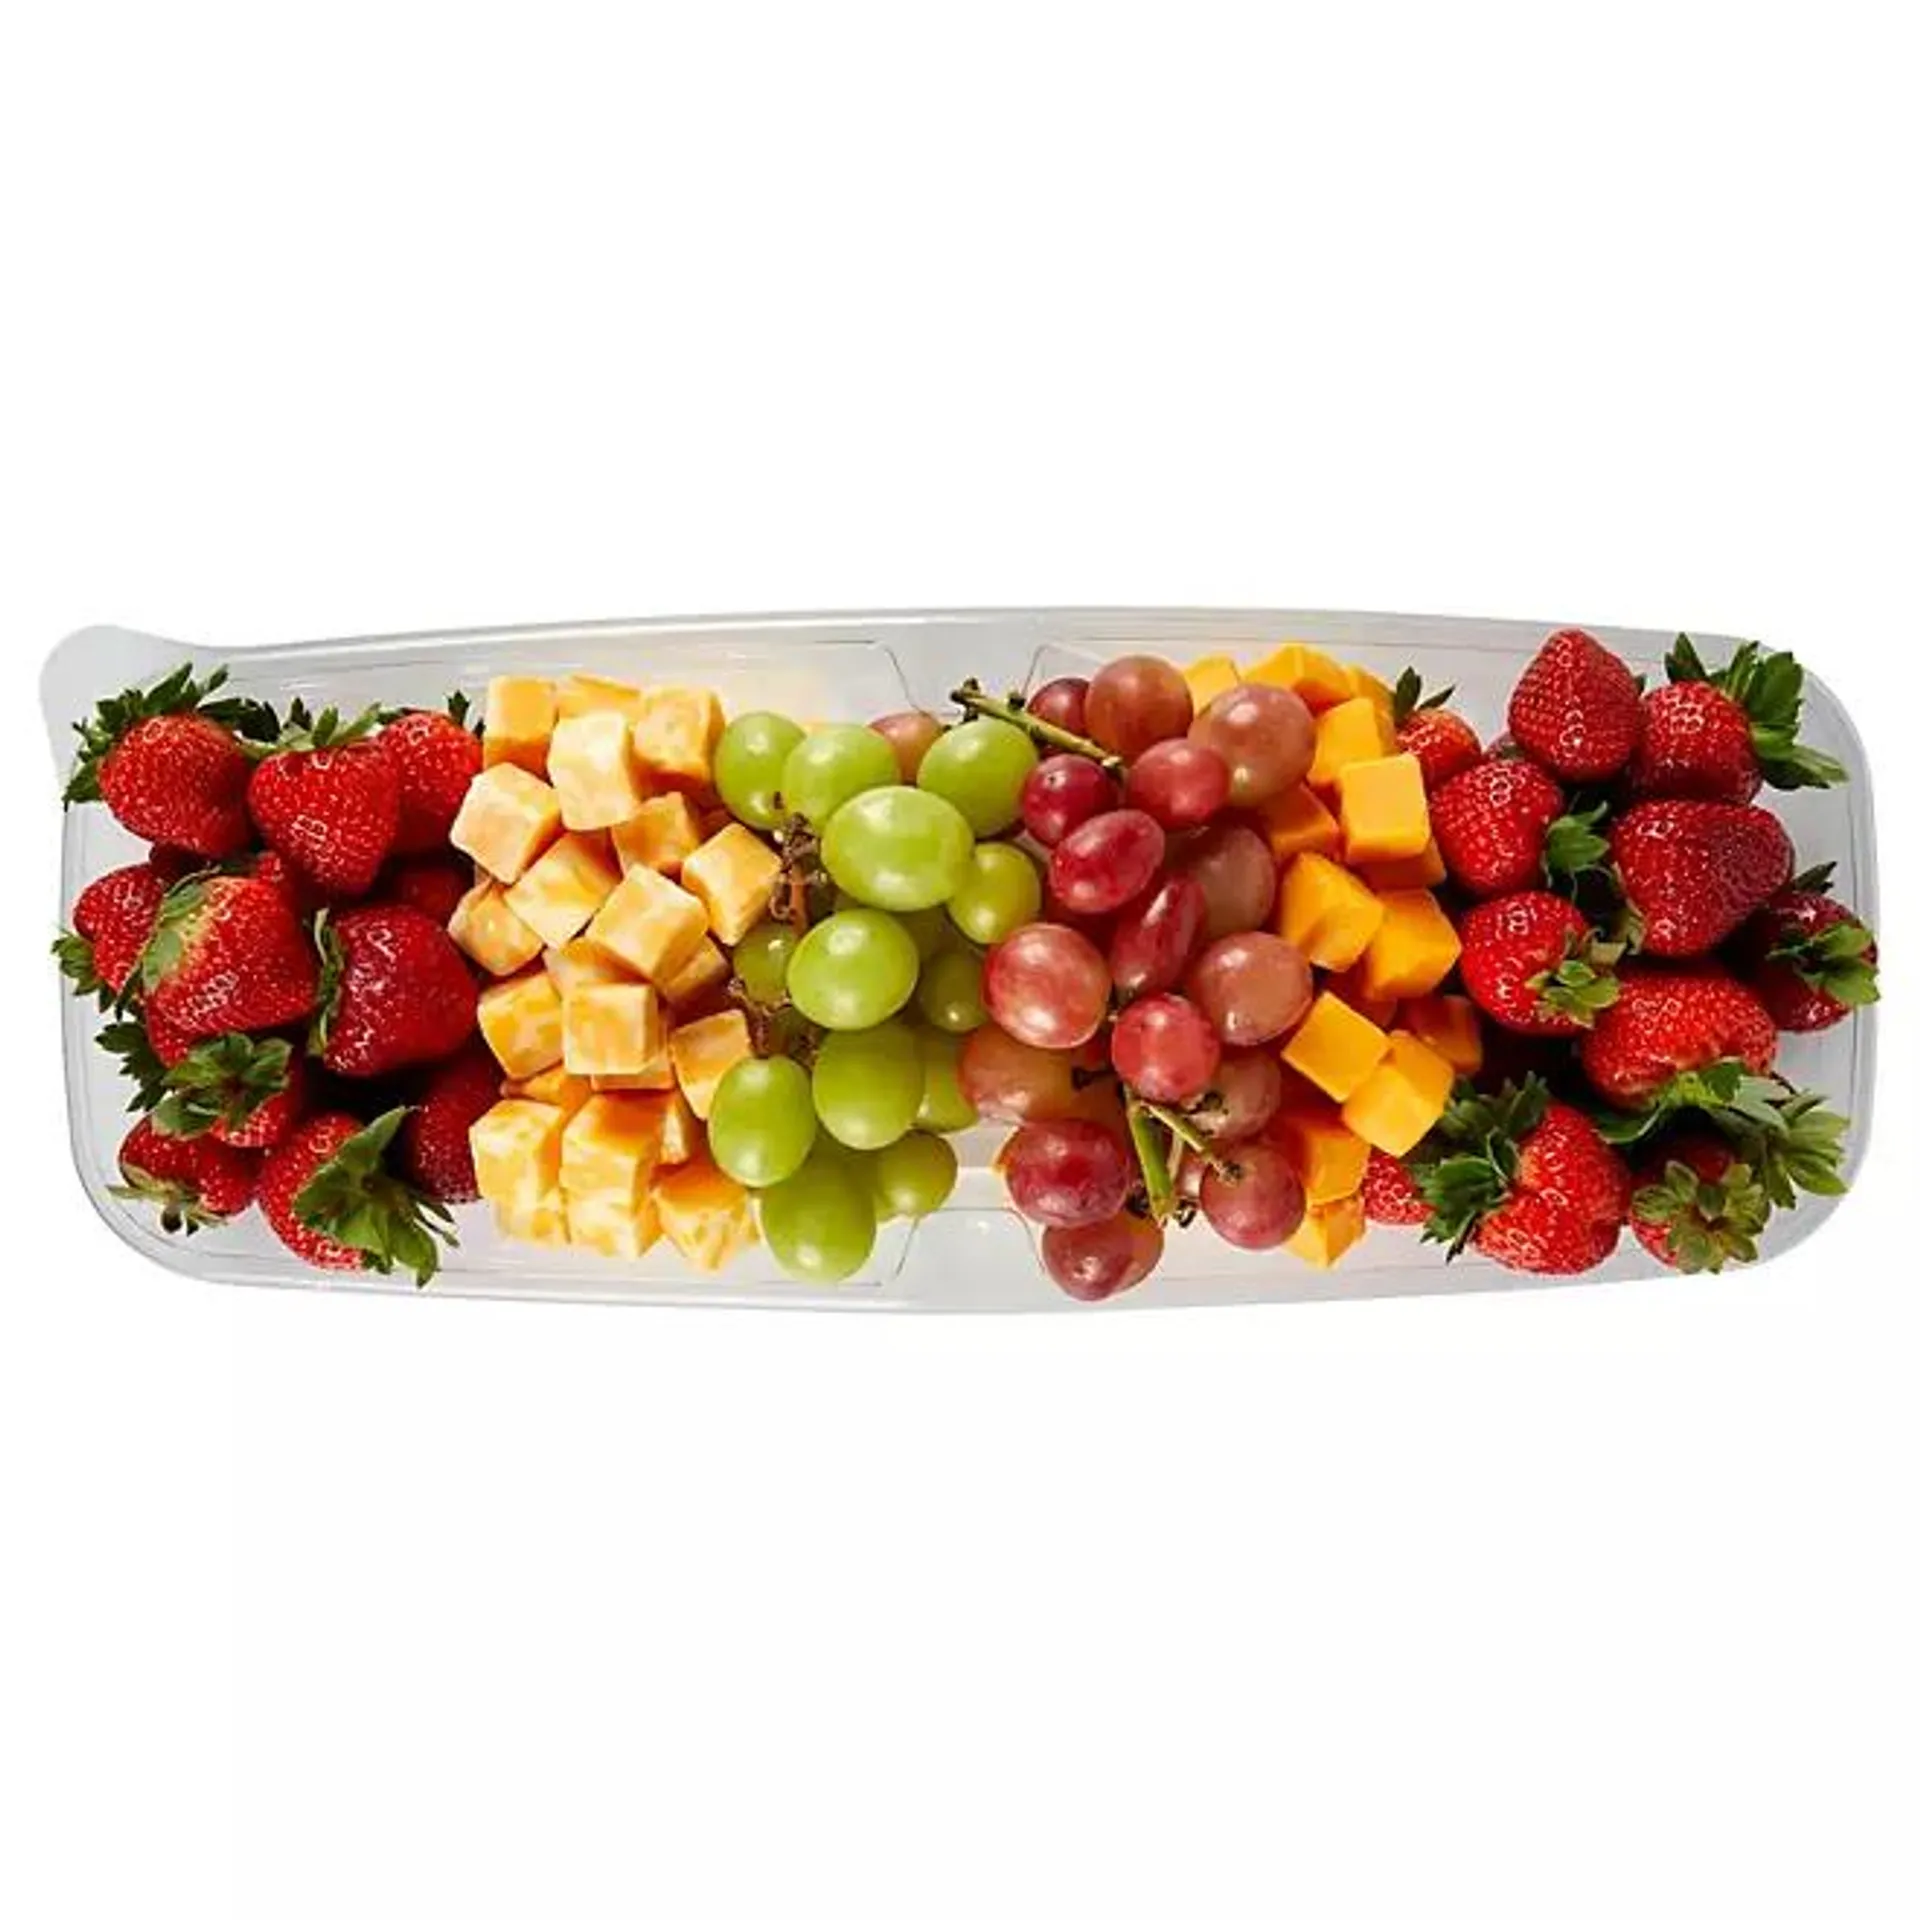 Member's Mark Fruit and Cheese Party Tray, priced per pound